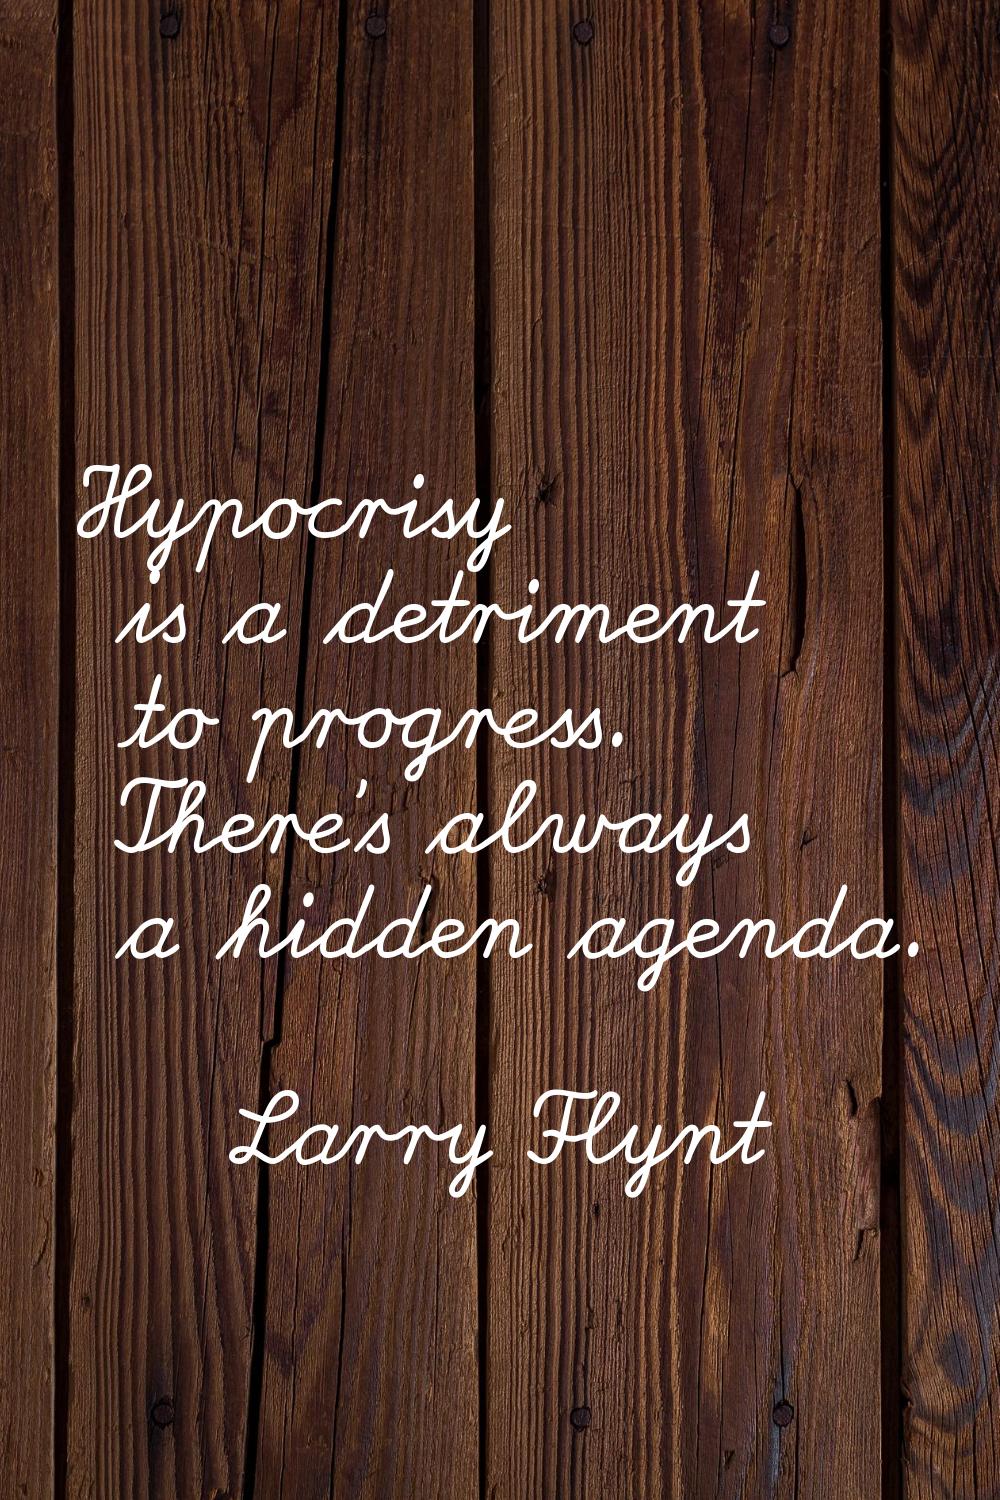 Hypocrisy is a detriment to progress. There's always a hidden agenda.